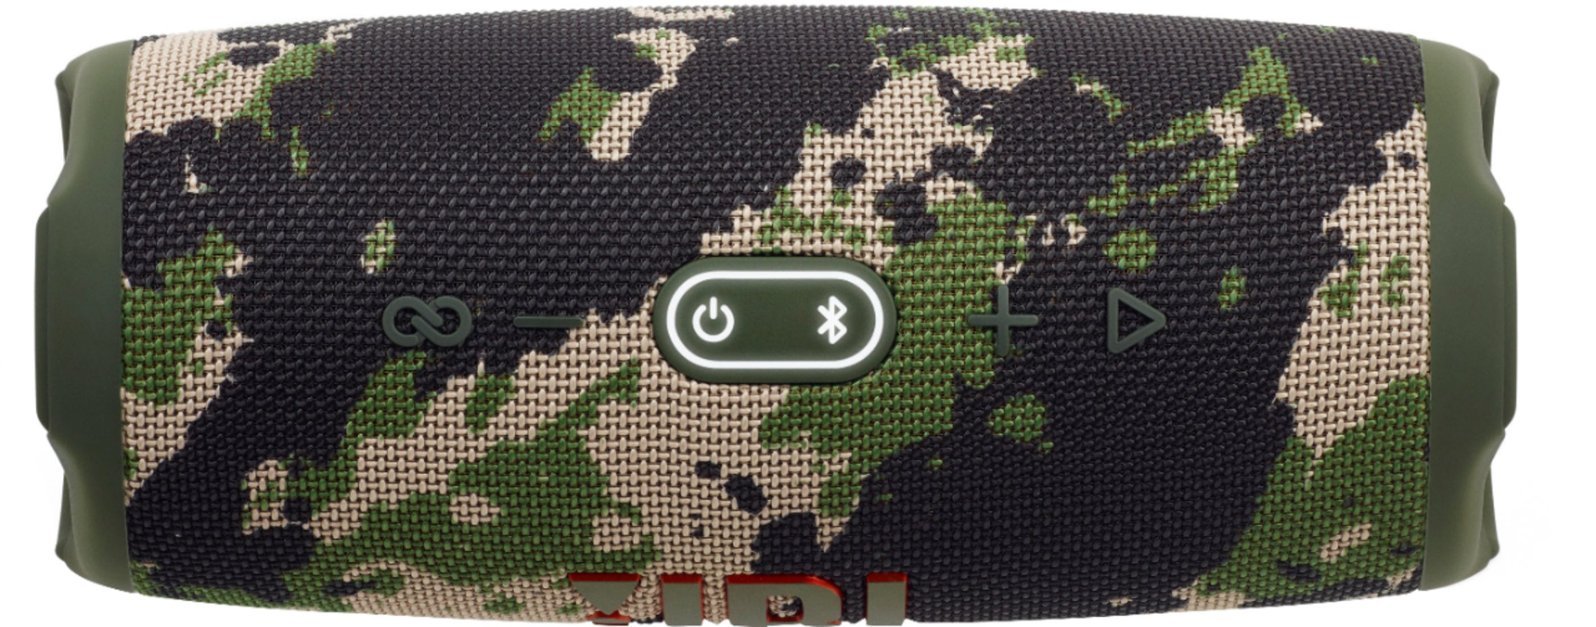 JBL CHARGE 5 Portable Bluetooth Speaker with Powerbank - Camo